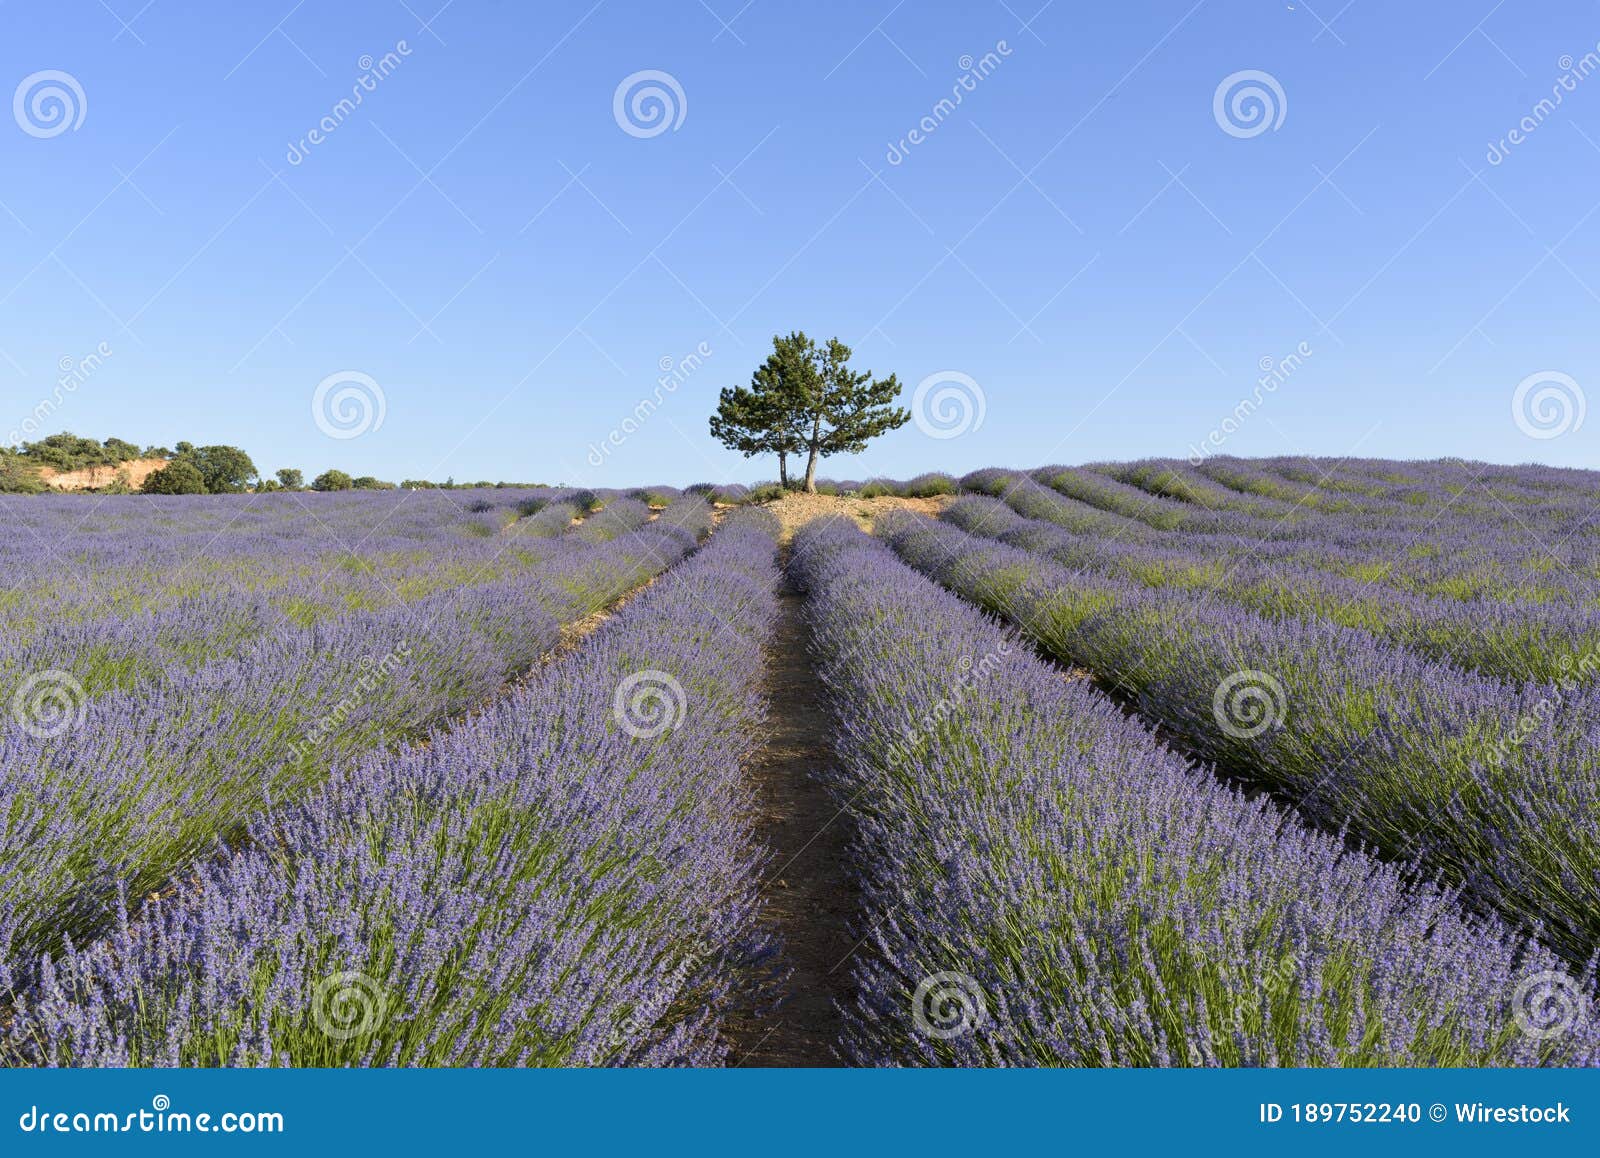 Beautiful Scene of a Lavender Field with a Single Tree and Clear Sky in ...